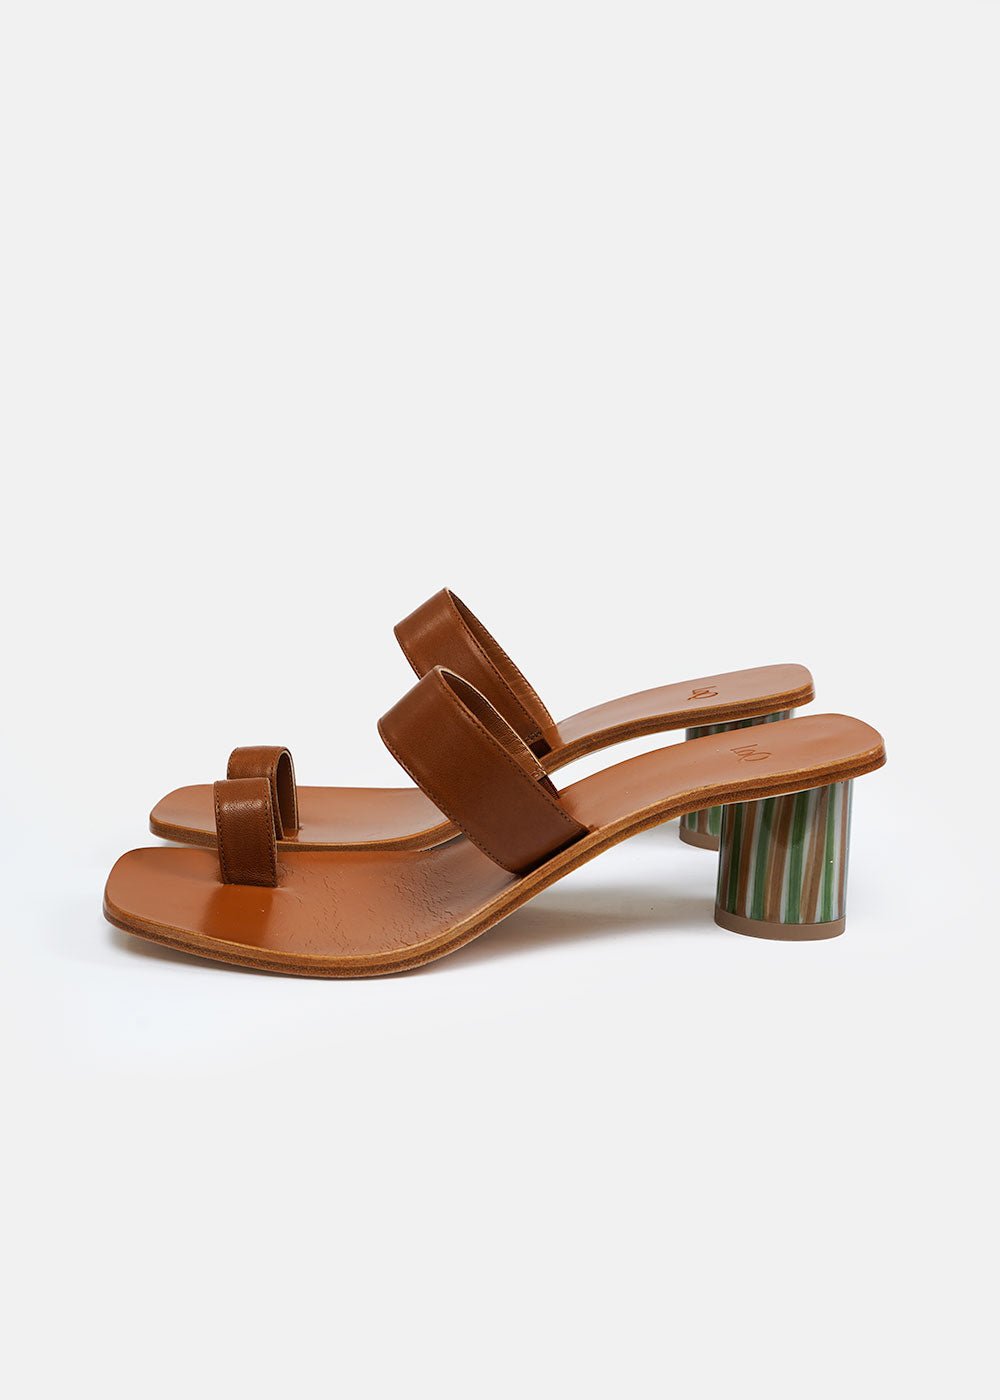 LoQ Flan Tere Sandals - New Classics Studios Sustainable Ethical Fashion Canada